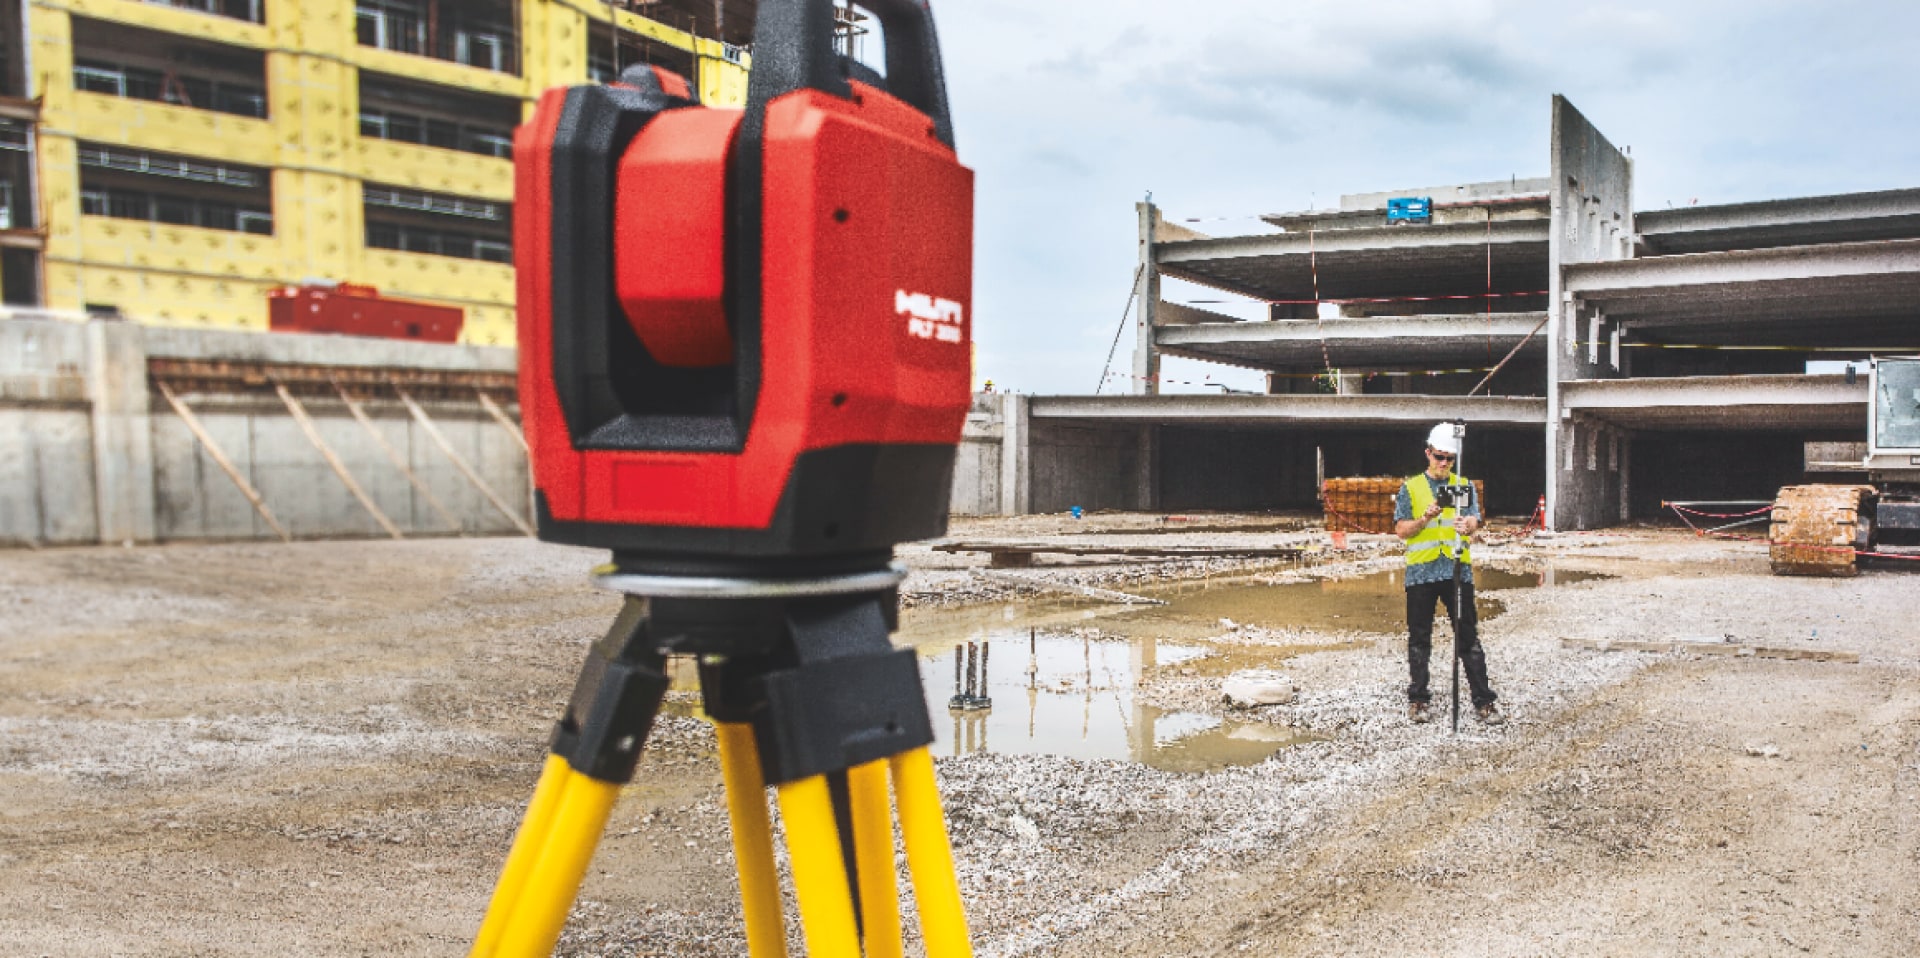 Layout tool (robotic total station with BIM capability) used for locating building elements on construction sites